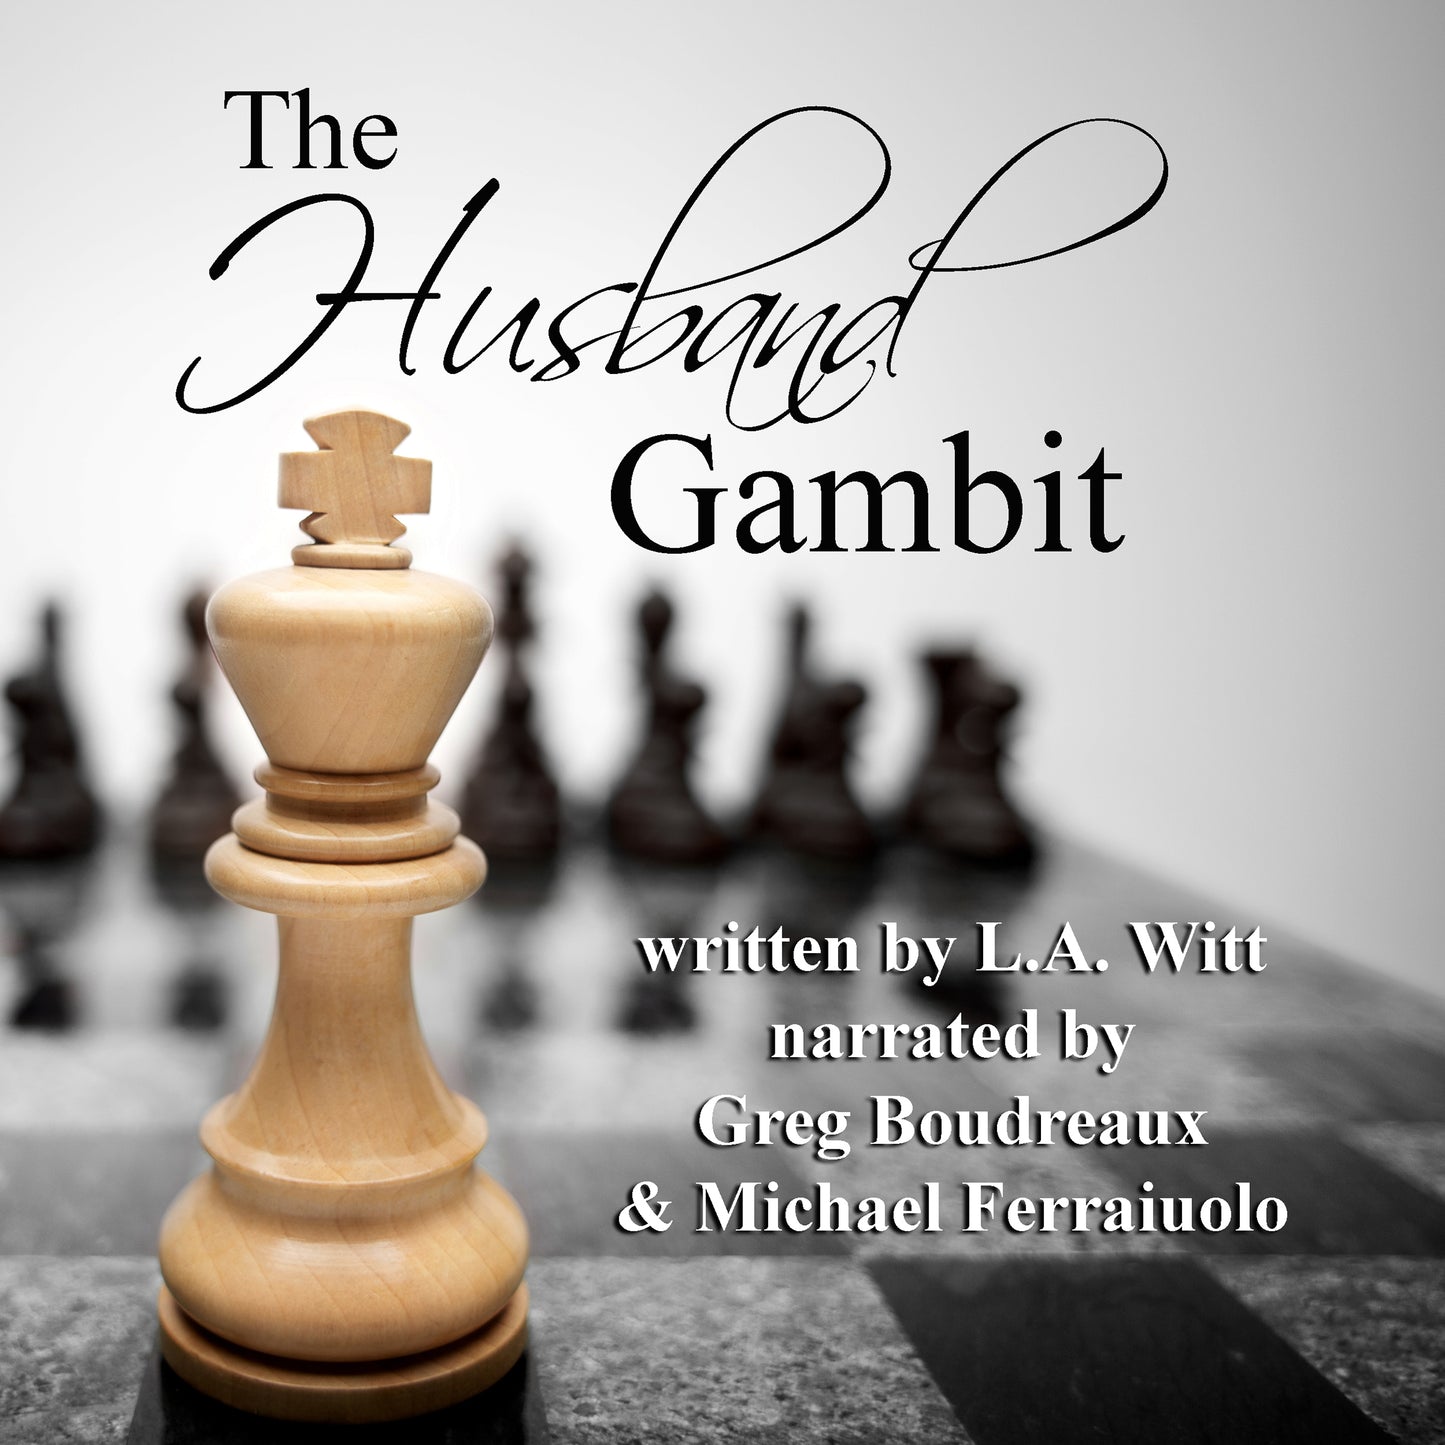 AUDIOBOOK: The Husband Gambit - narrated by Michael Ferraiuolo & Greg Boudreaux